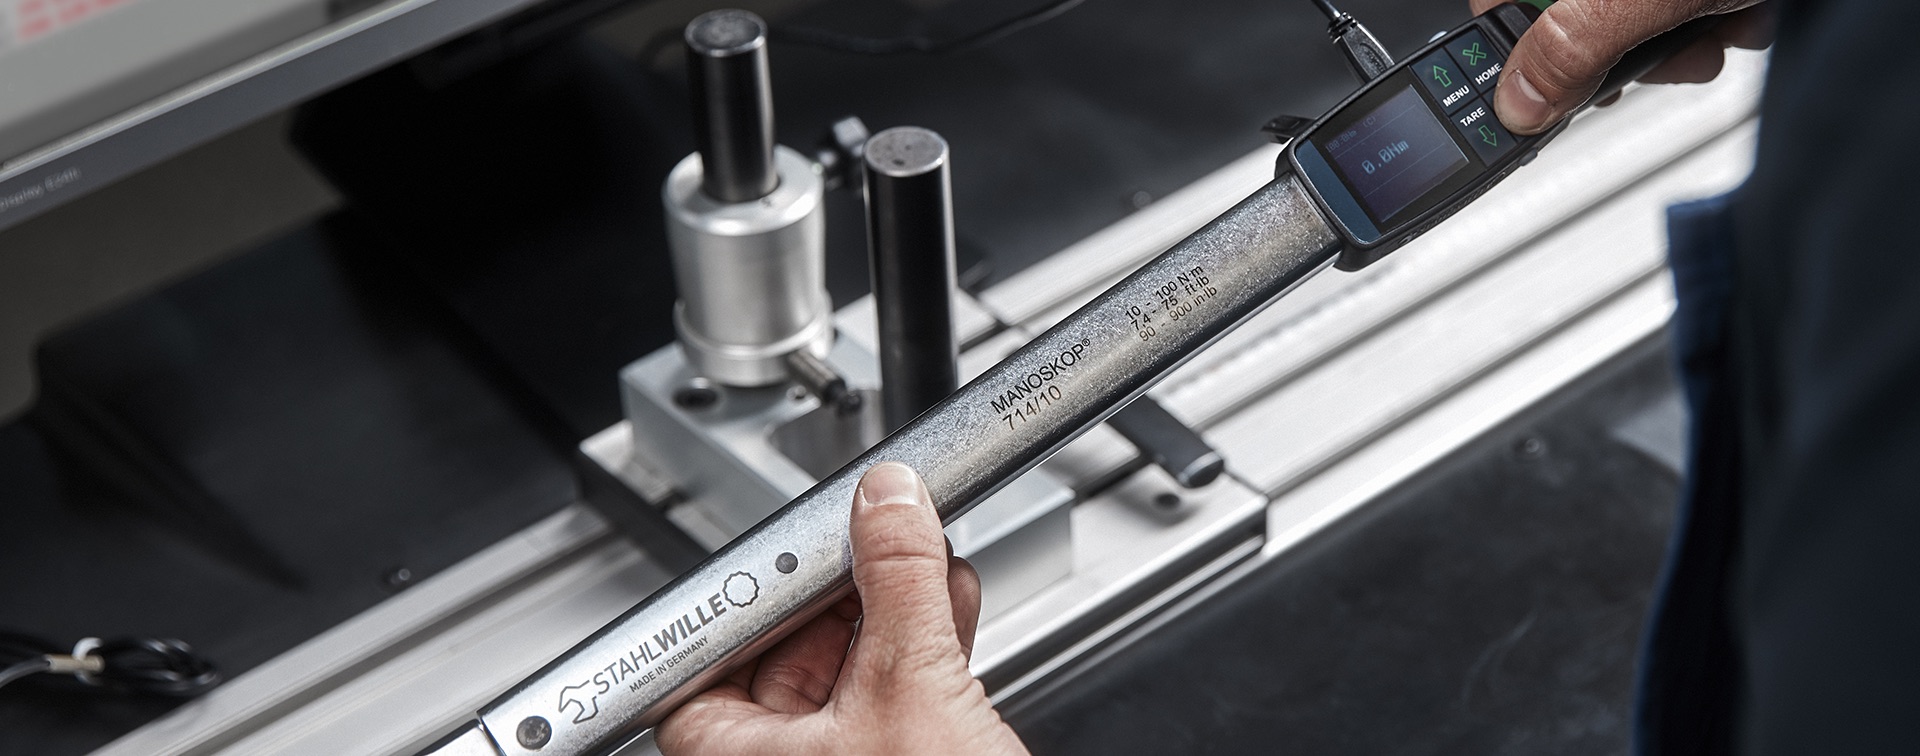  STAHLWILLE torque wrench is calibrated